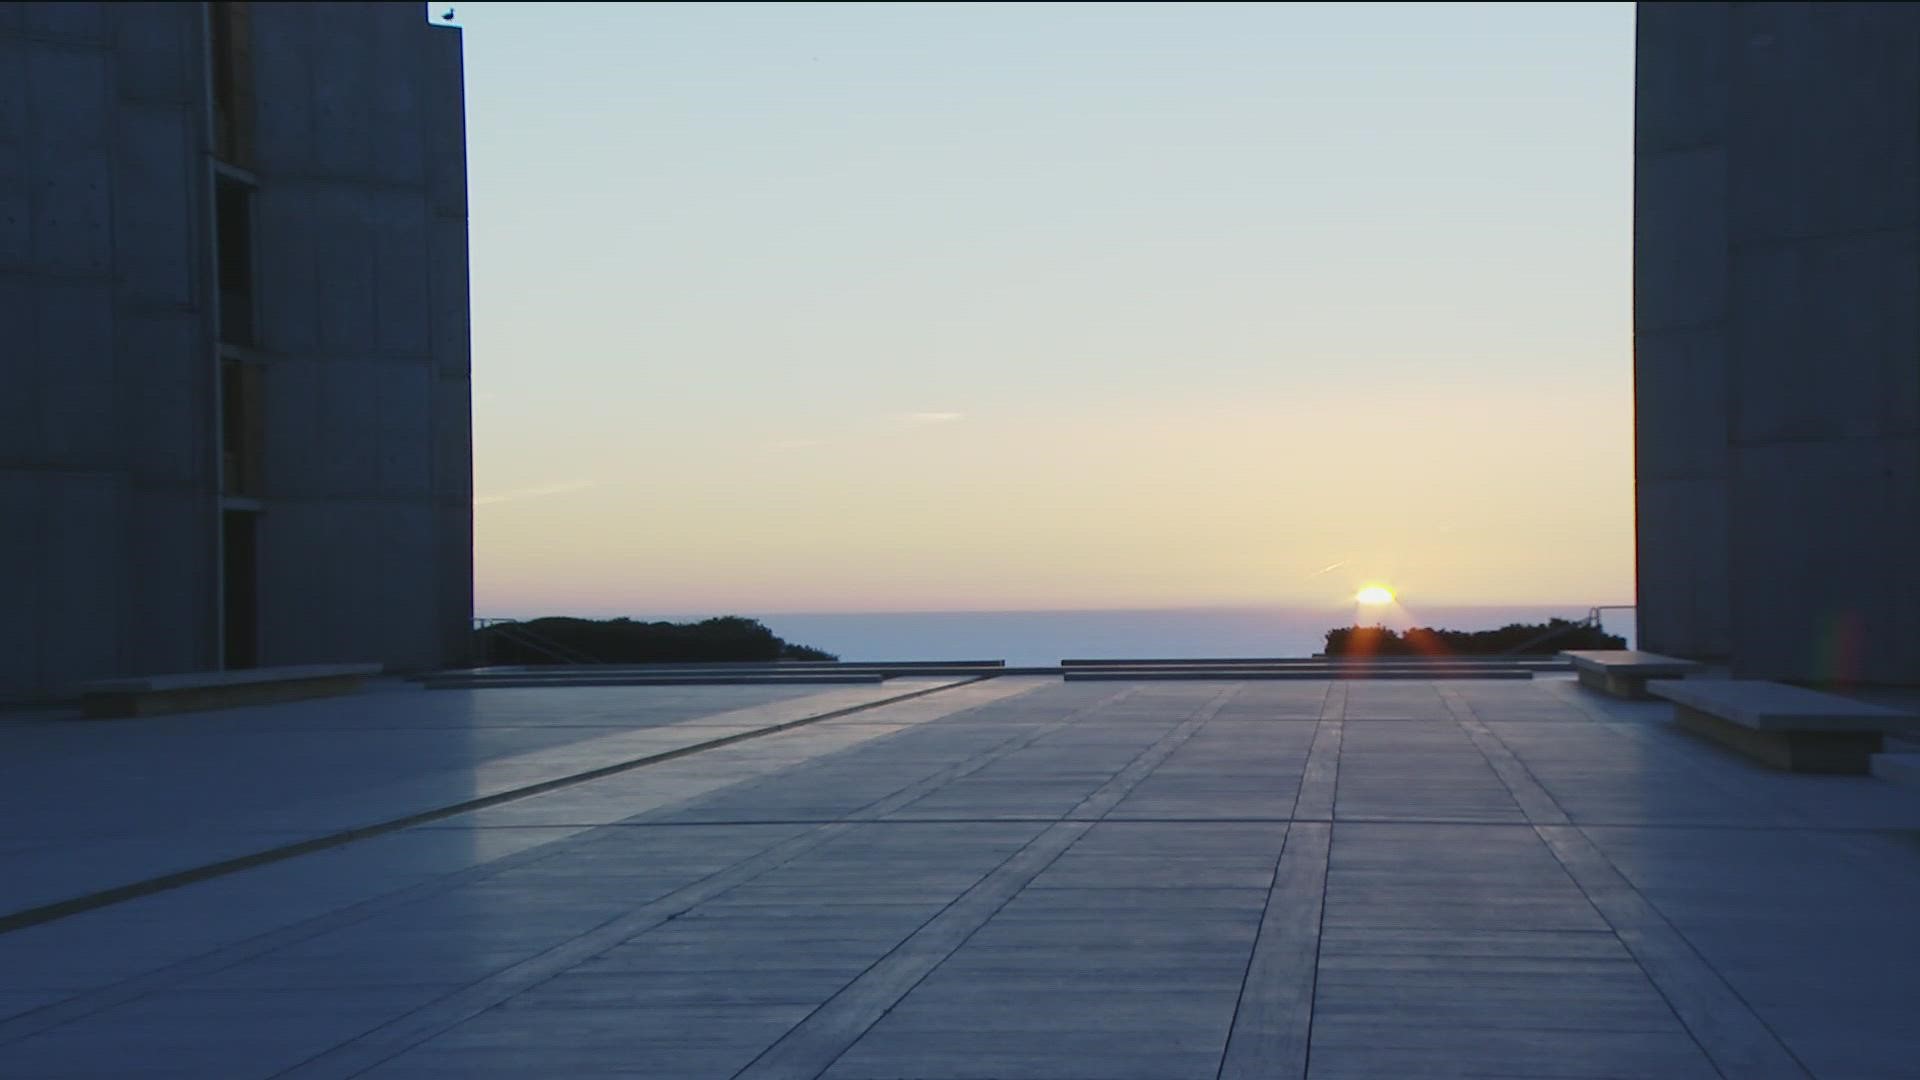 Nearly 100 San Diegans gathered to witness the magic moment as the sun sets over ocean at the Salk Institute in La Jolla. The 'Salkhenge' event happens twice a year.